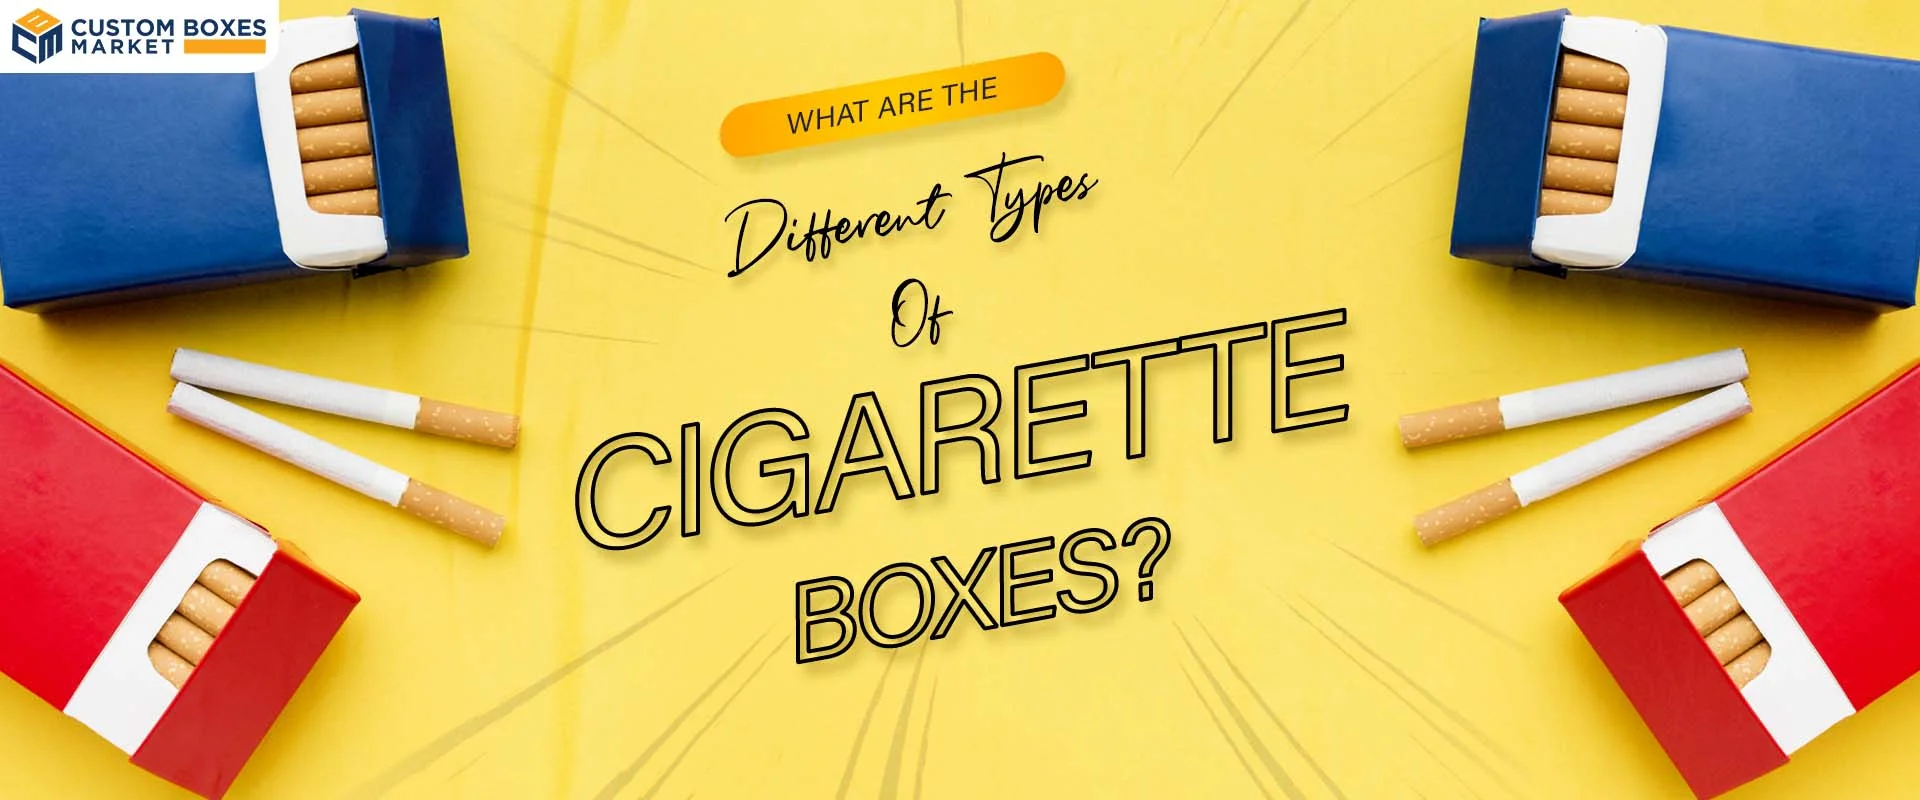 What Are The Different Types Of Cigarette Boxes?